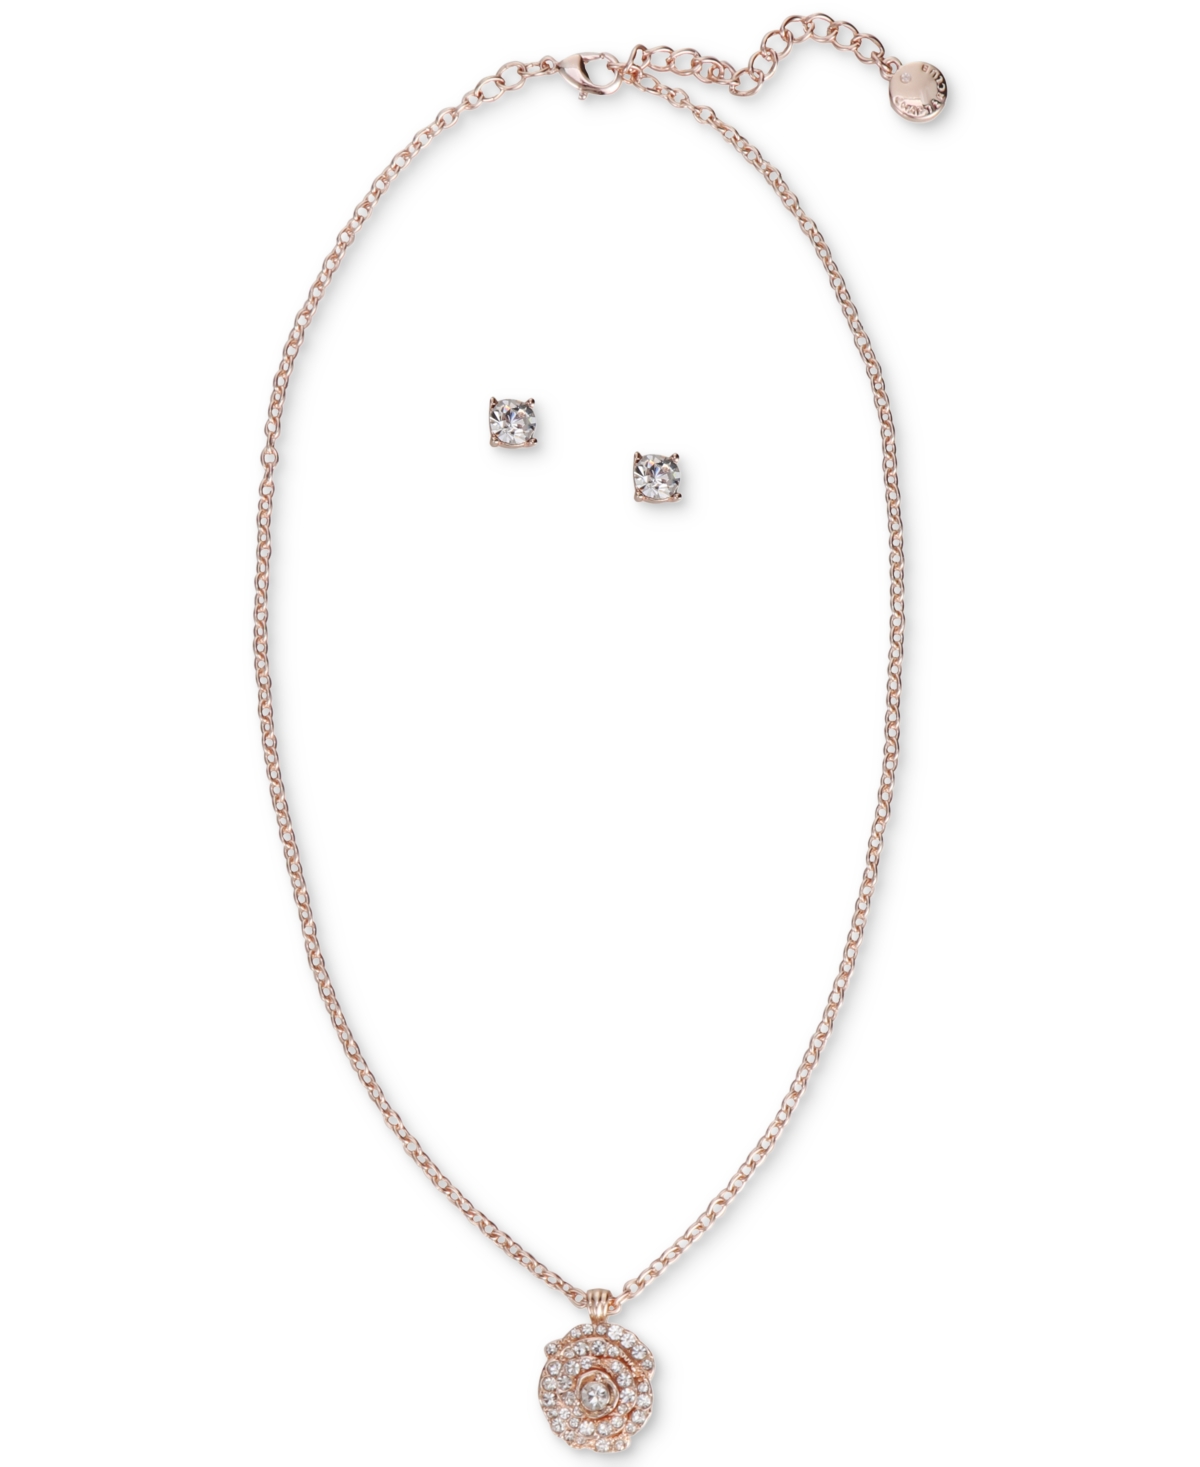 Charter Club Crystal Pendant Necklace and Earrings Set in 18K Rose Gold  Plate, Gold Plate or Fine Silver Plate, Created for Macy's - Macy's